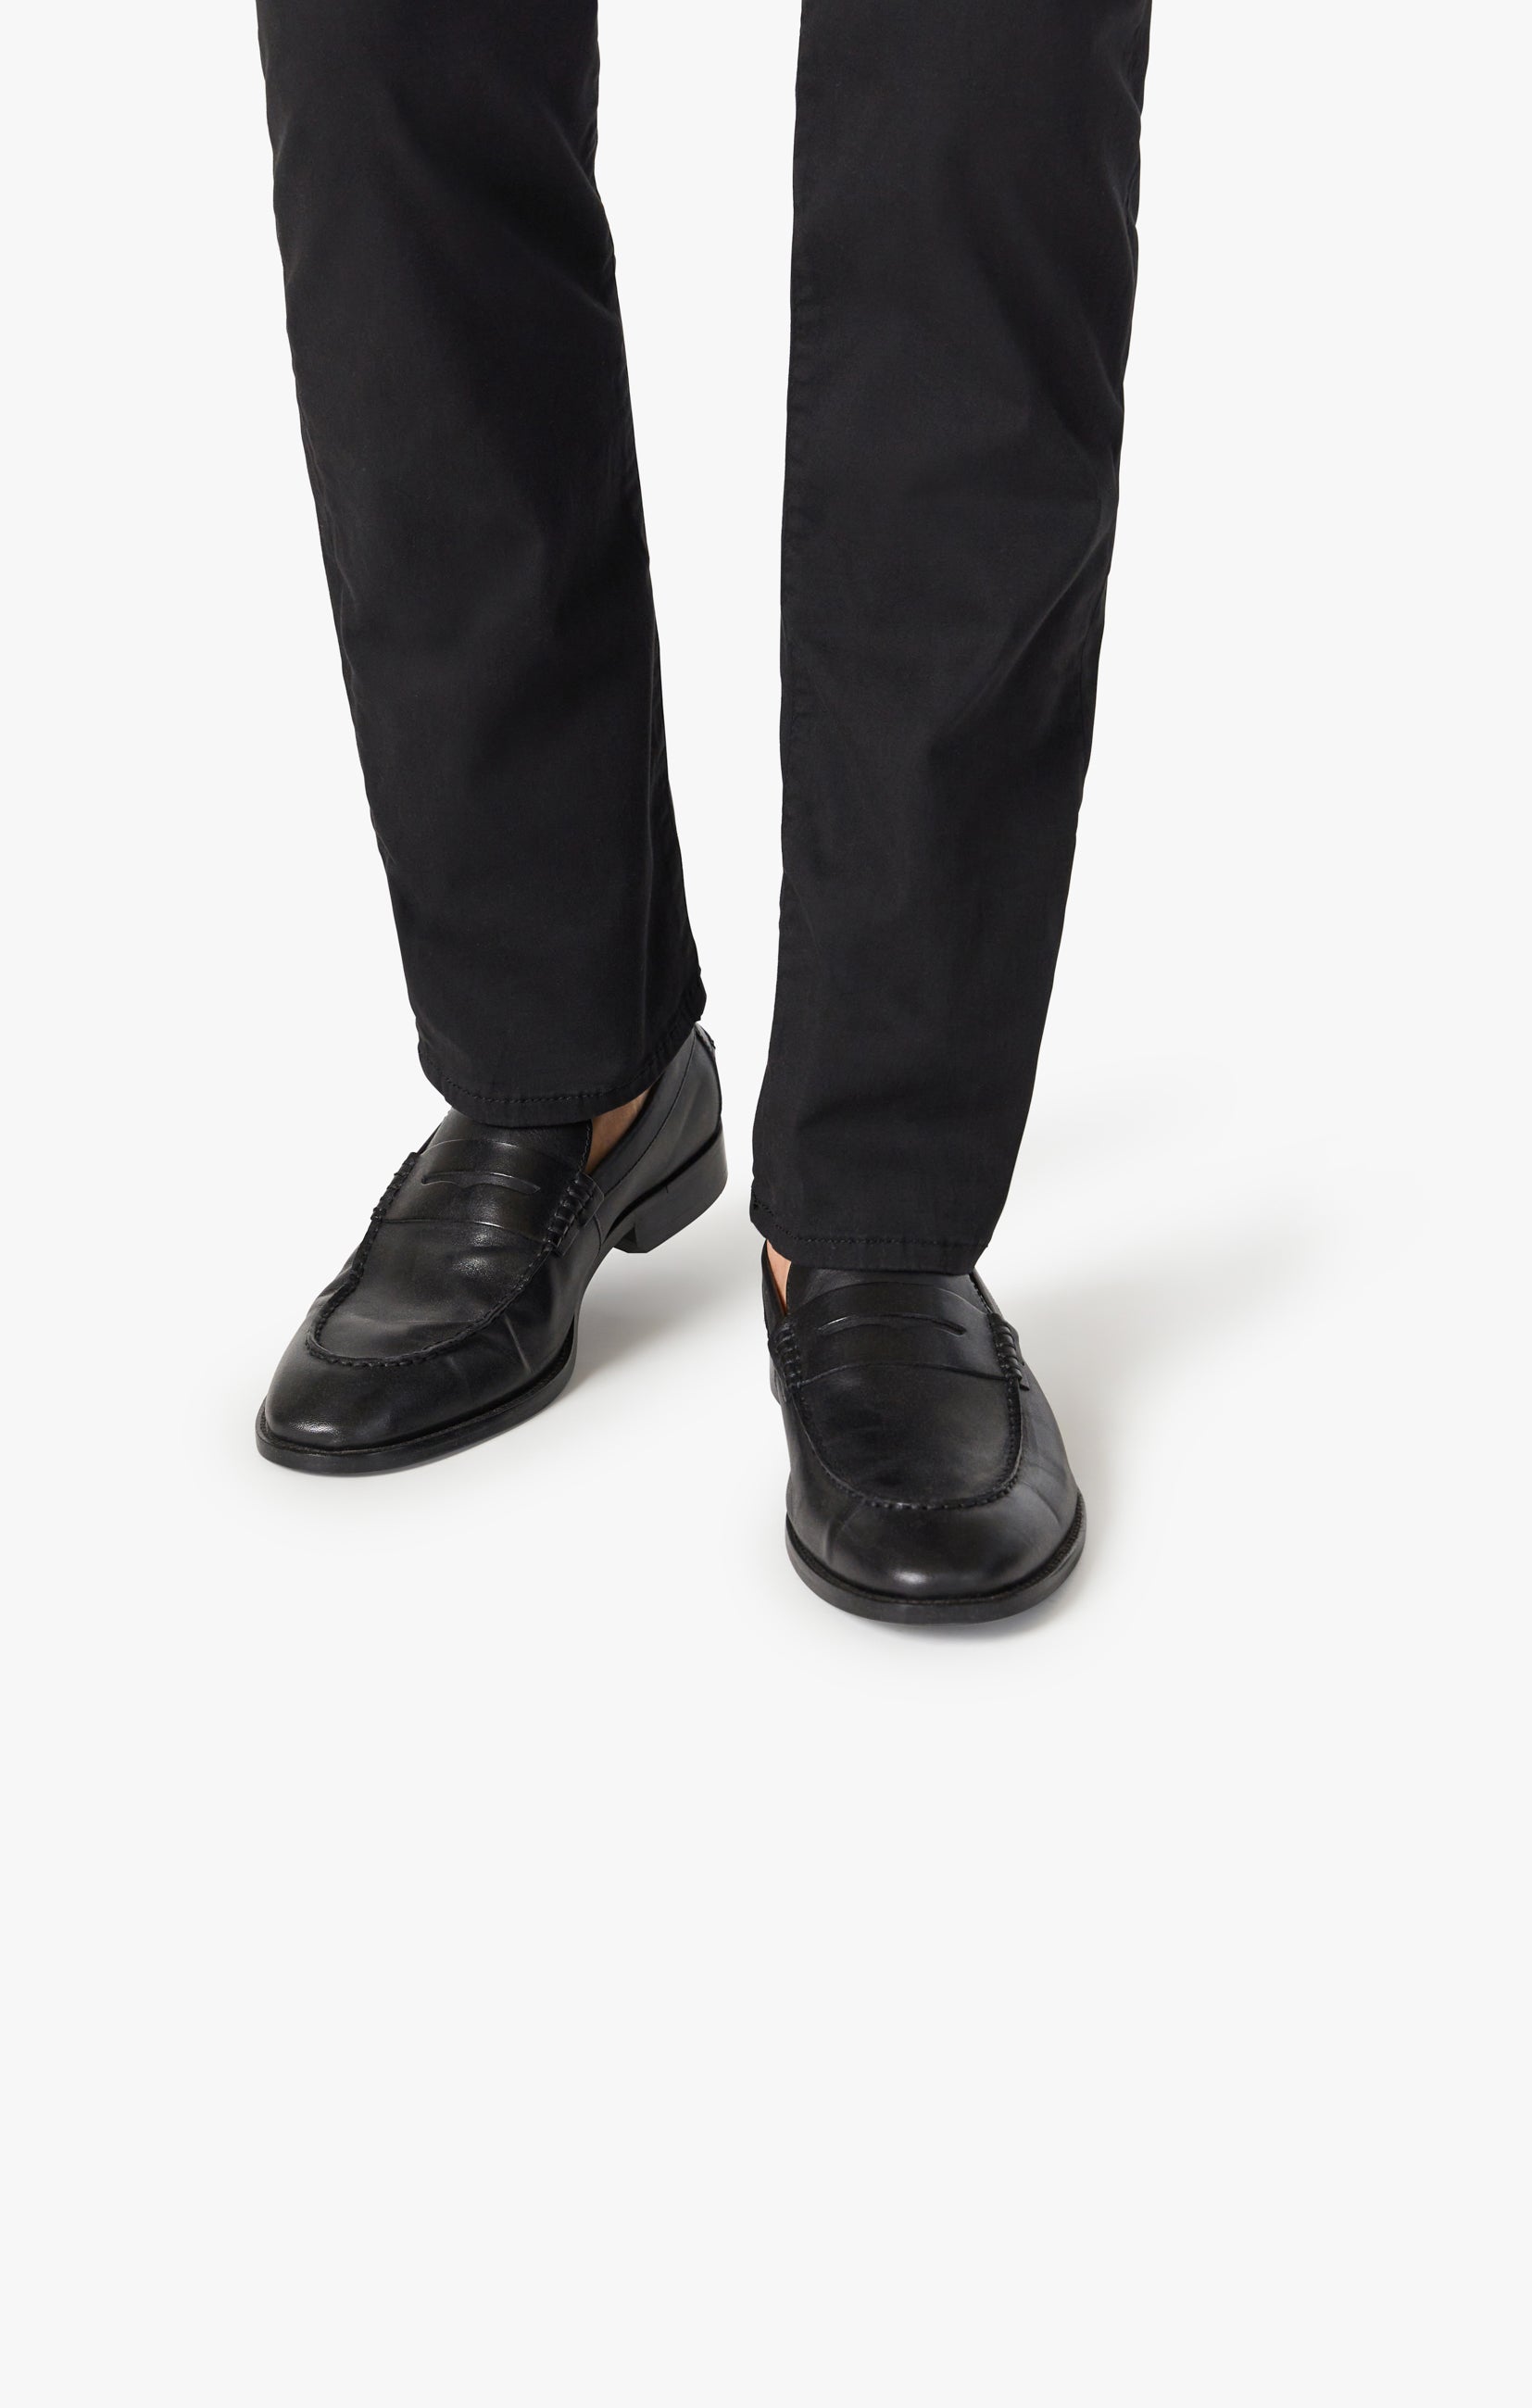 Courage Straight Leg Pants in Black Twill Image 6